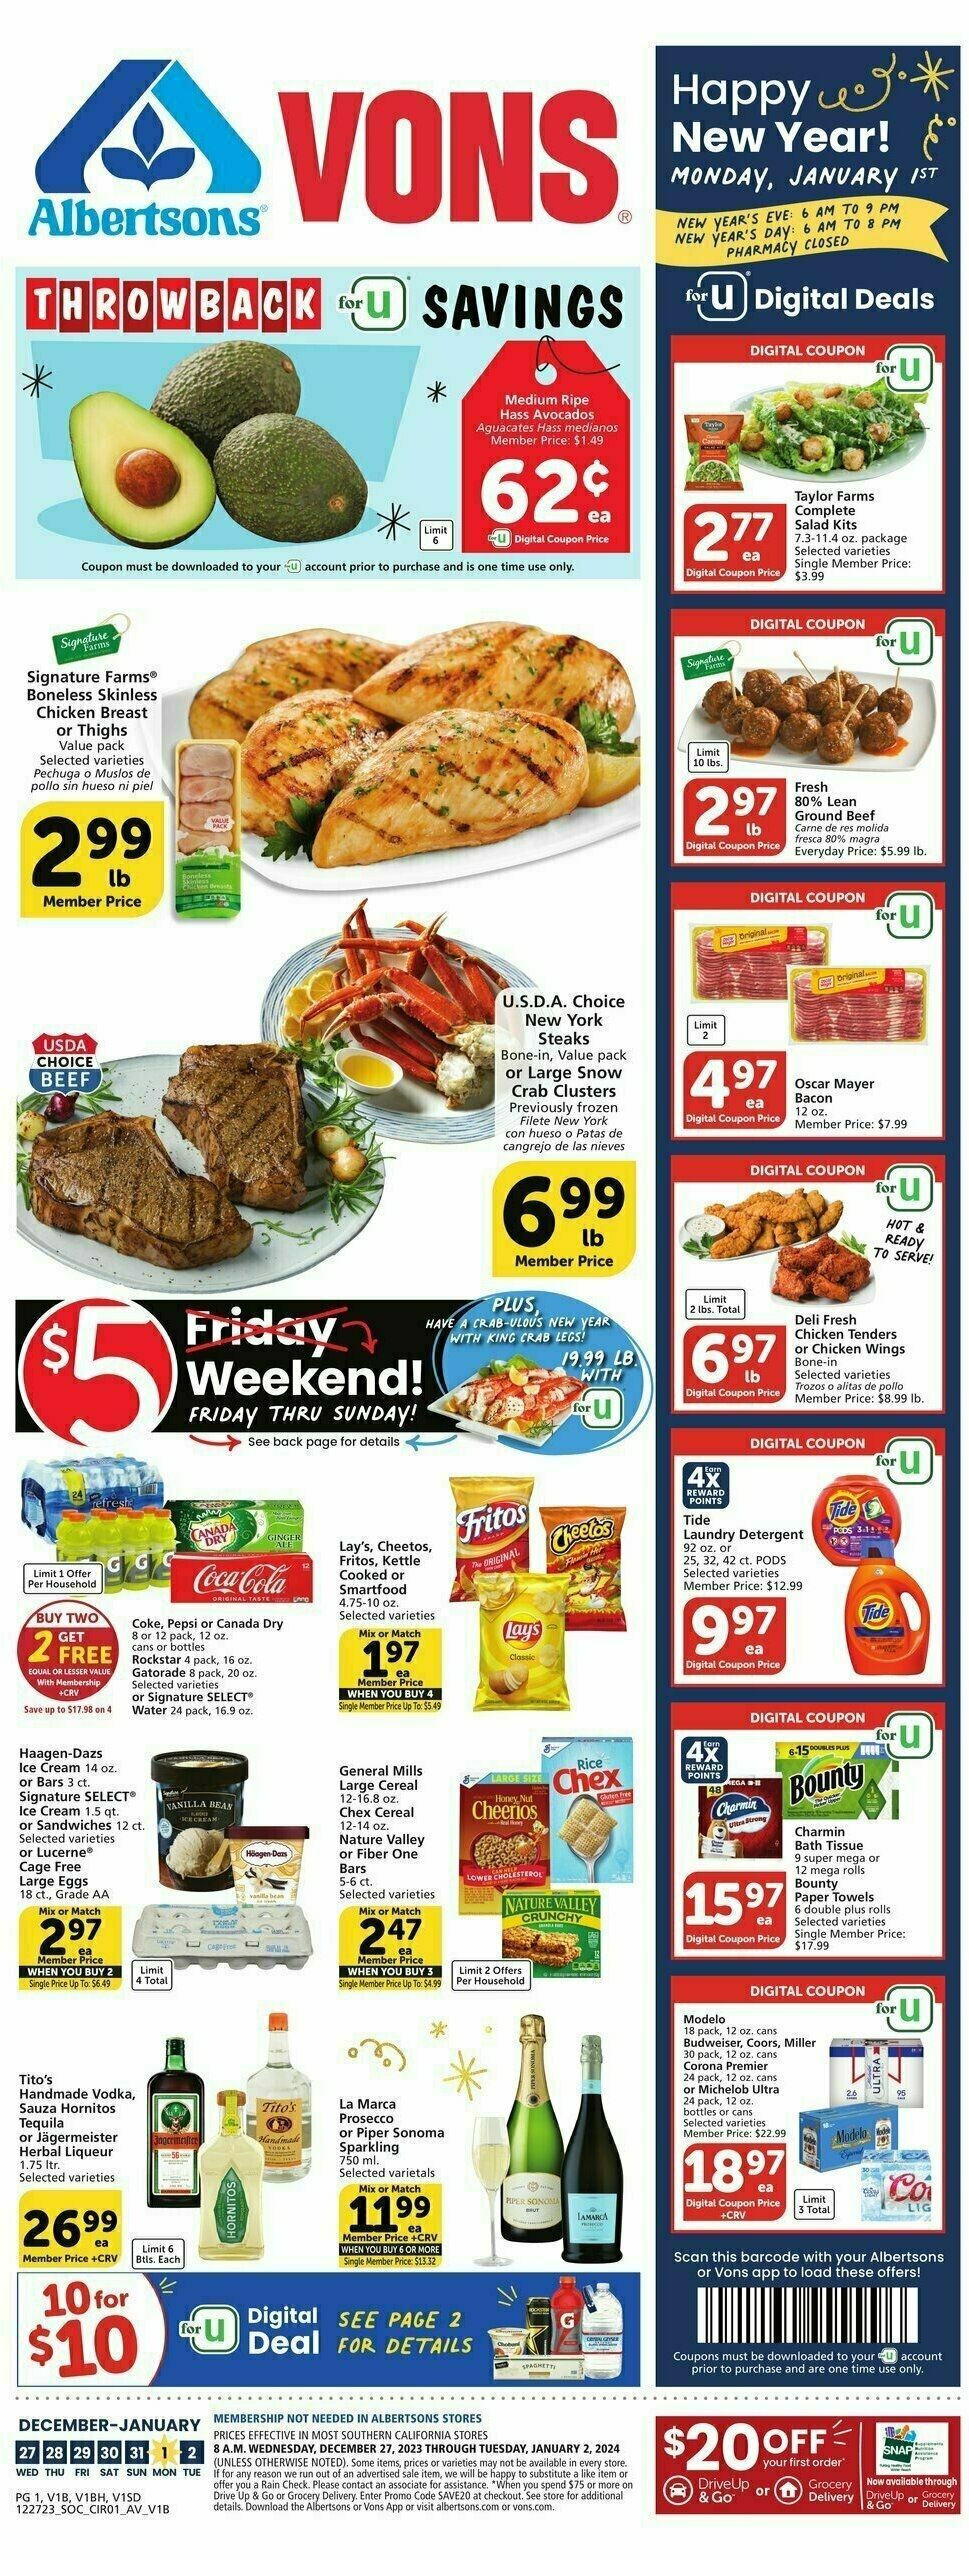 Vons Weekly Ad from December 27